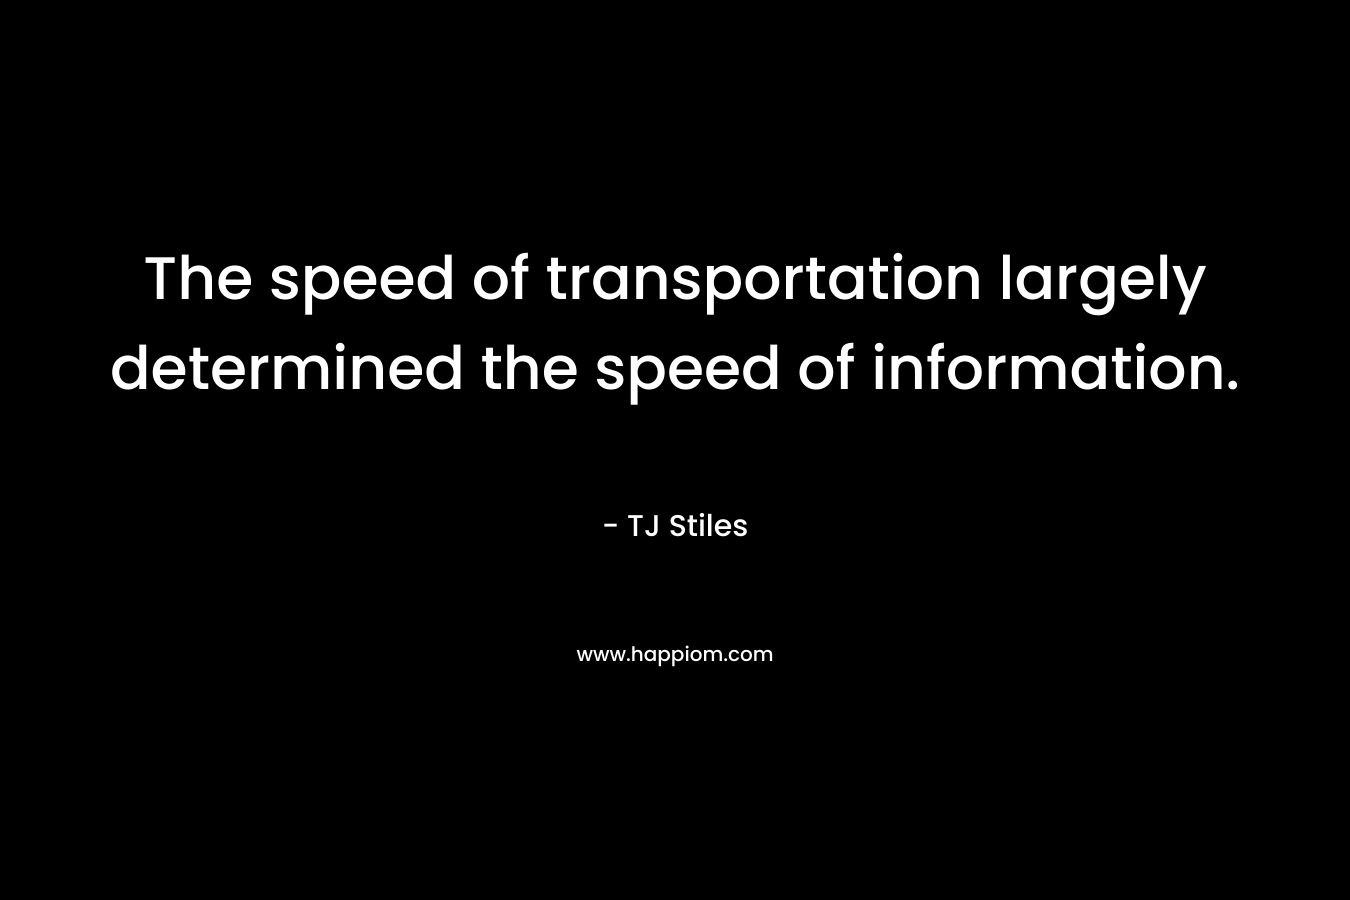 The speed of transportation largely determined the speed of information.